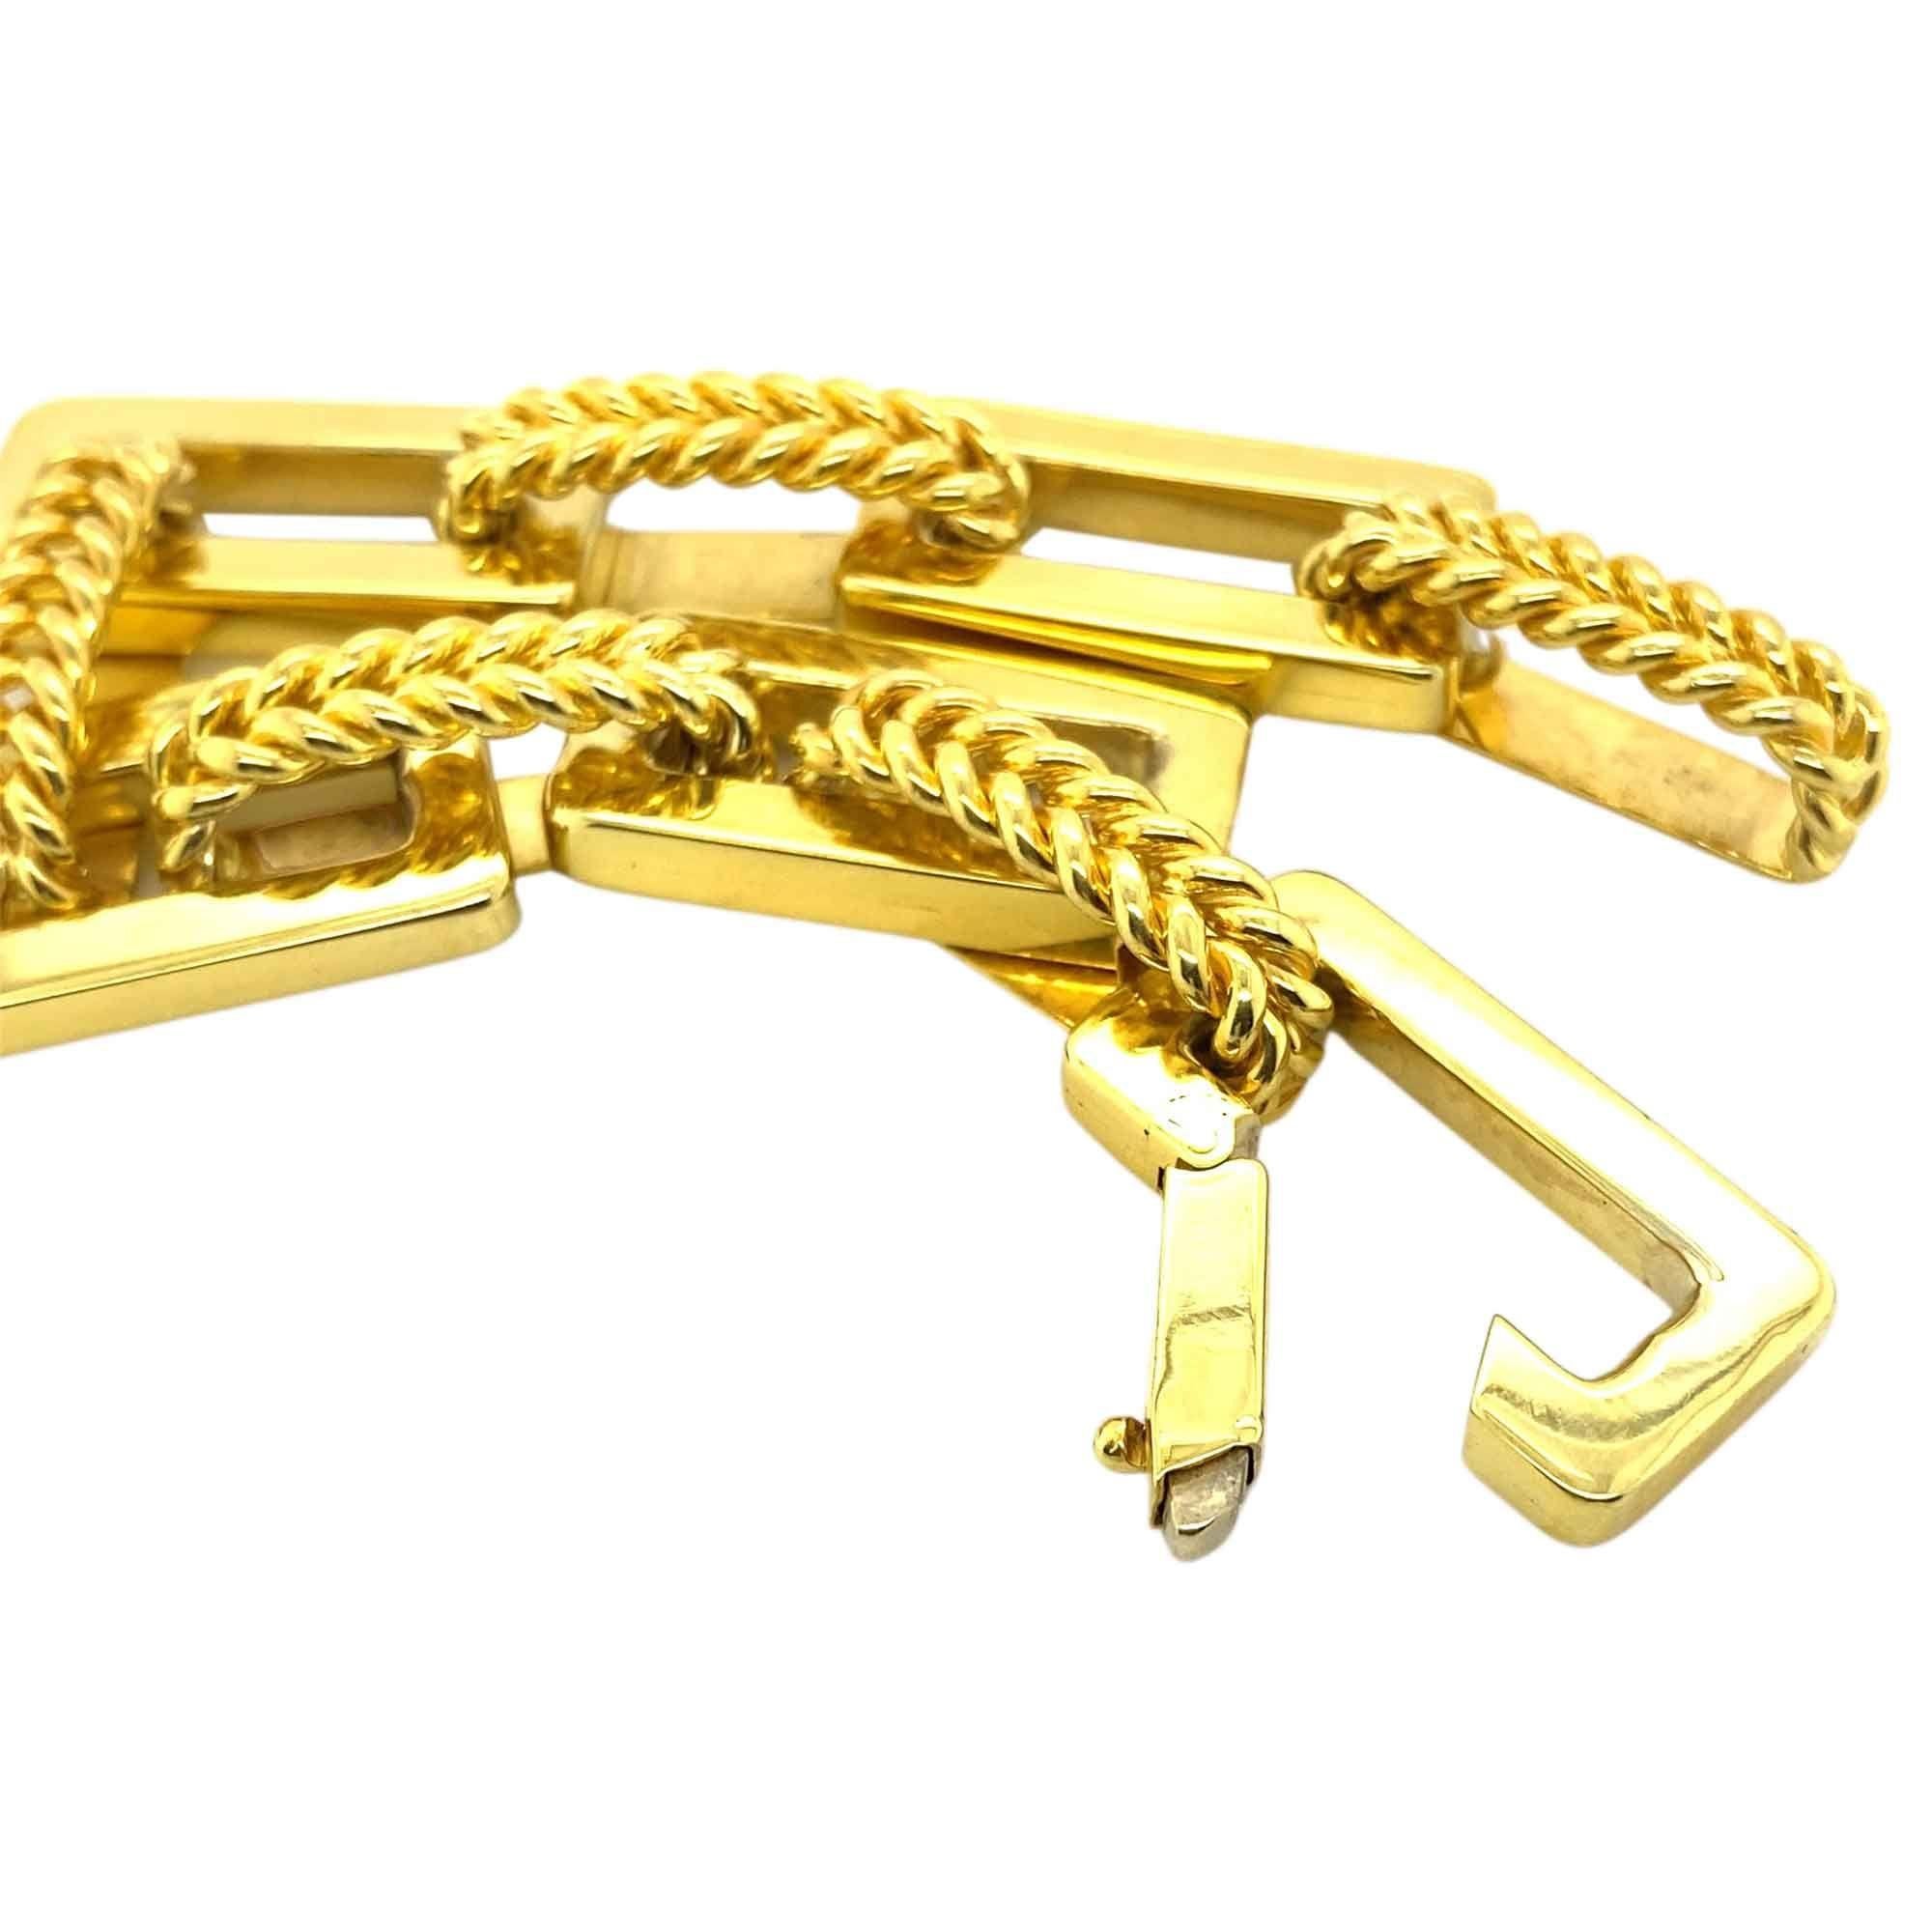 Are you looking for a bracelet with a BIG look on the wrist? Something eye-catching that could be layered with others? This fabulous 18k yellow gold bracelet could be just what you are searching for. A classic combination of big rectangular links